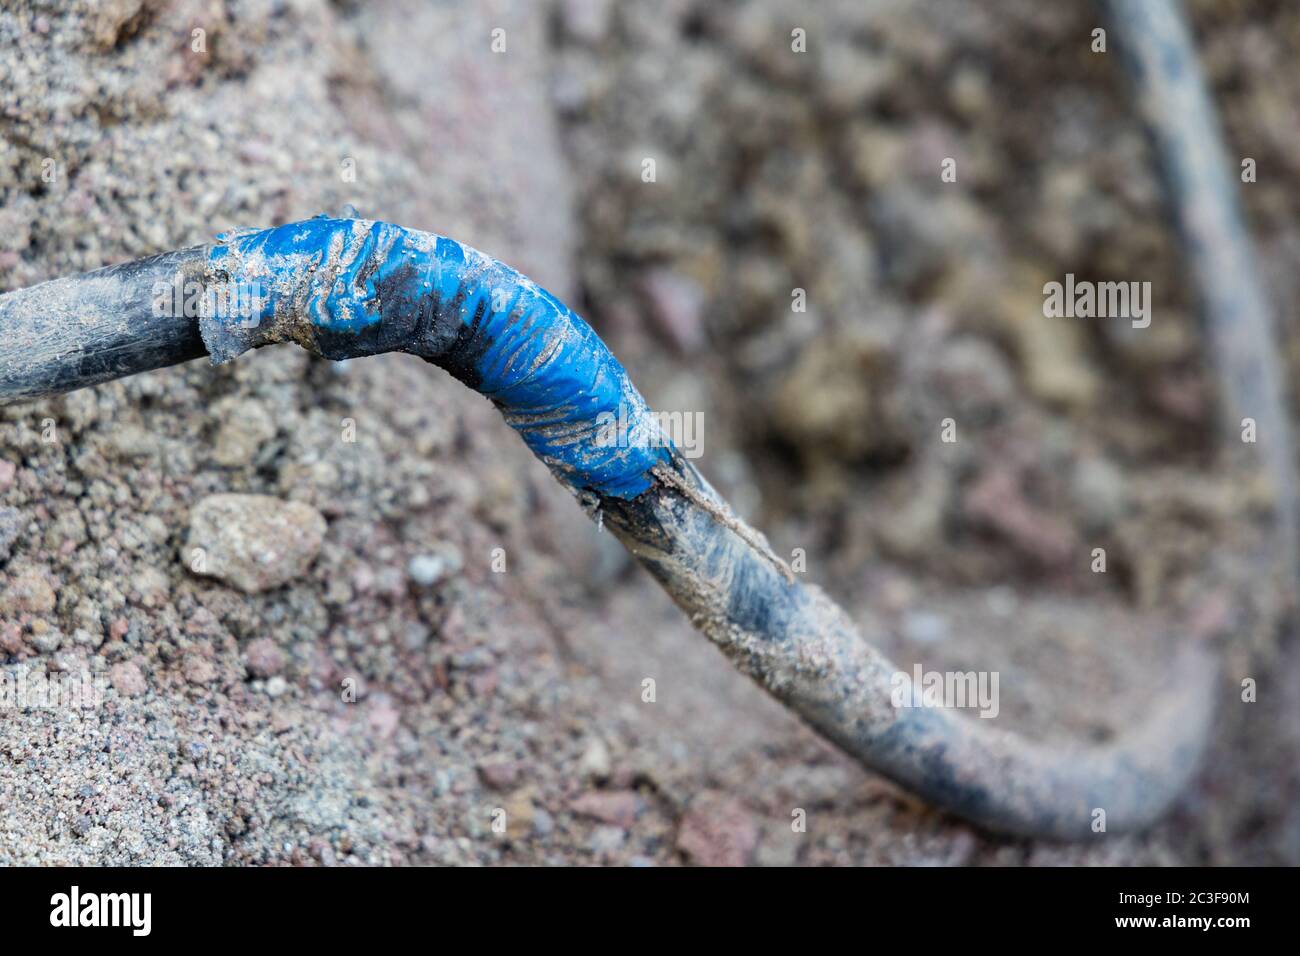 improper repair of cable after excavator damage Stock Photo